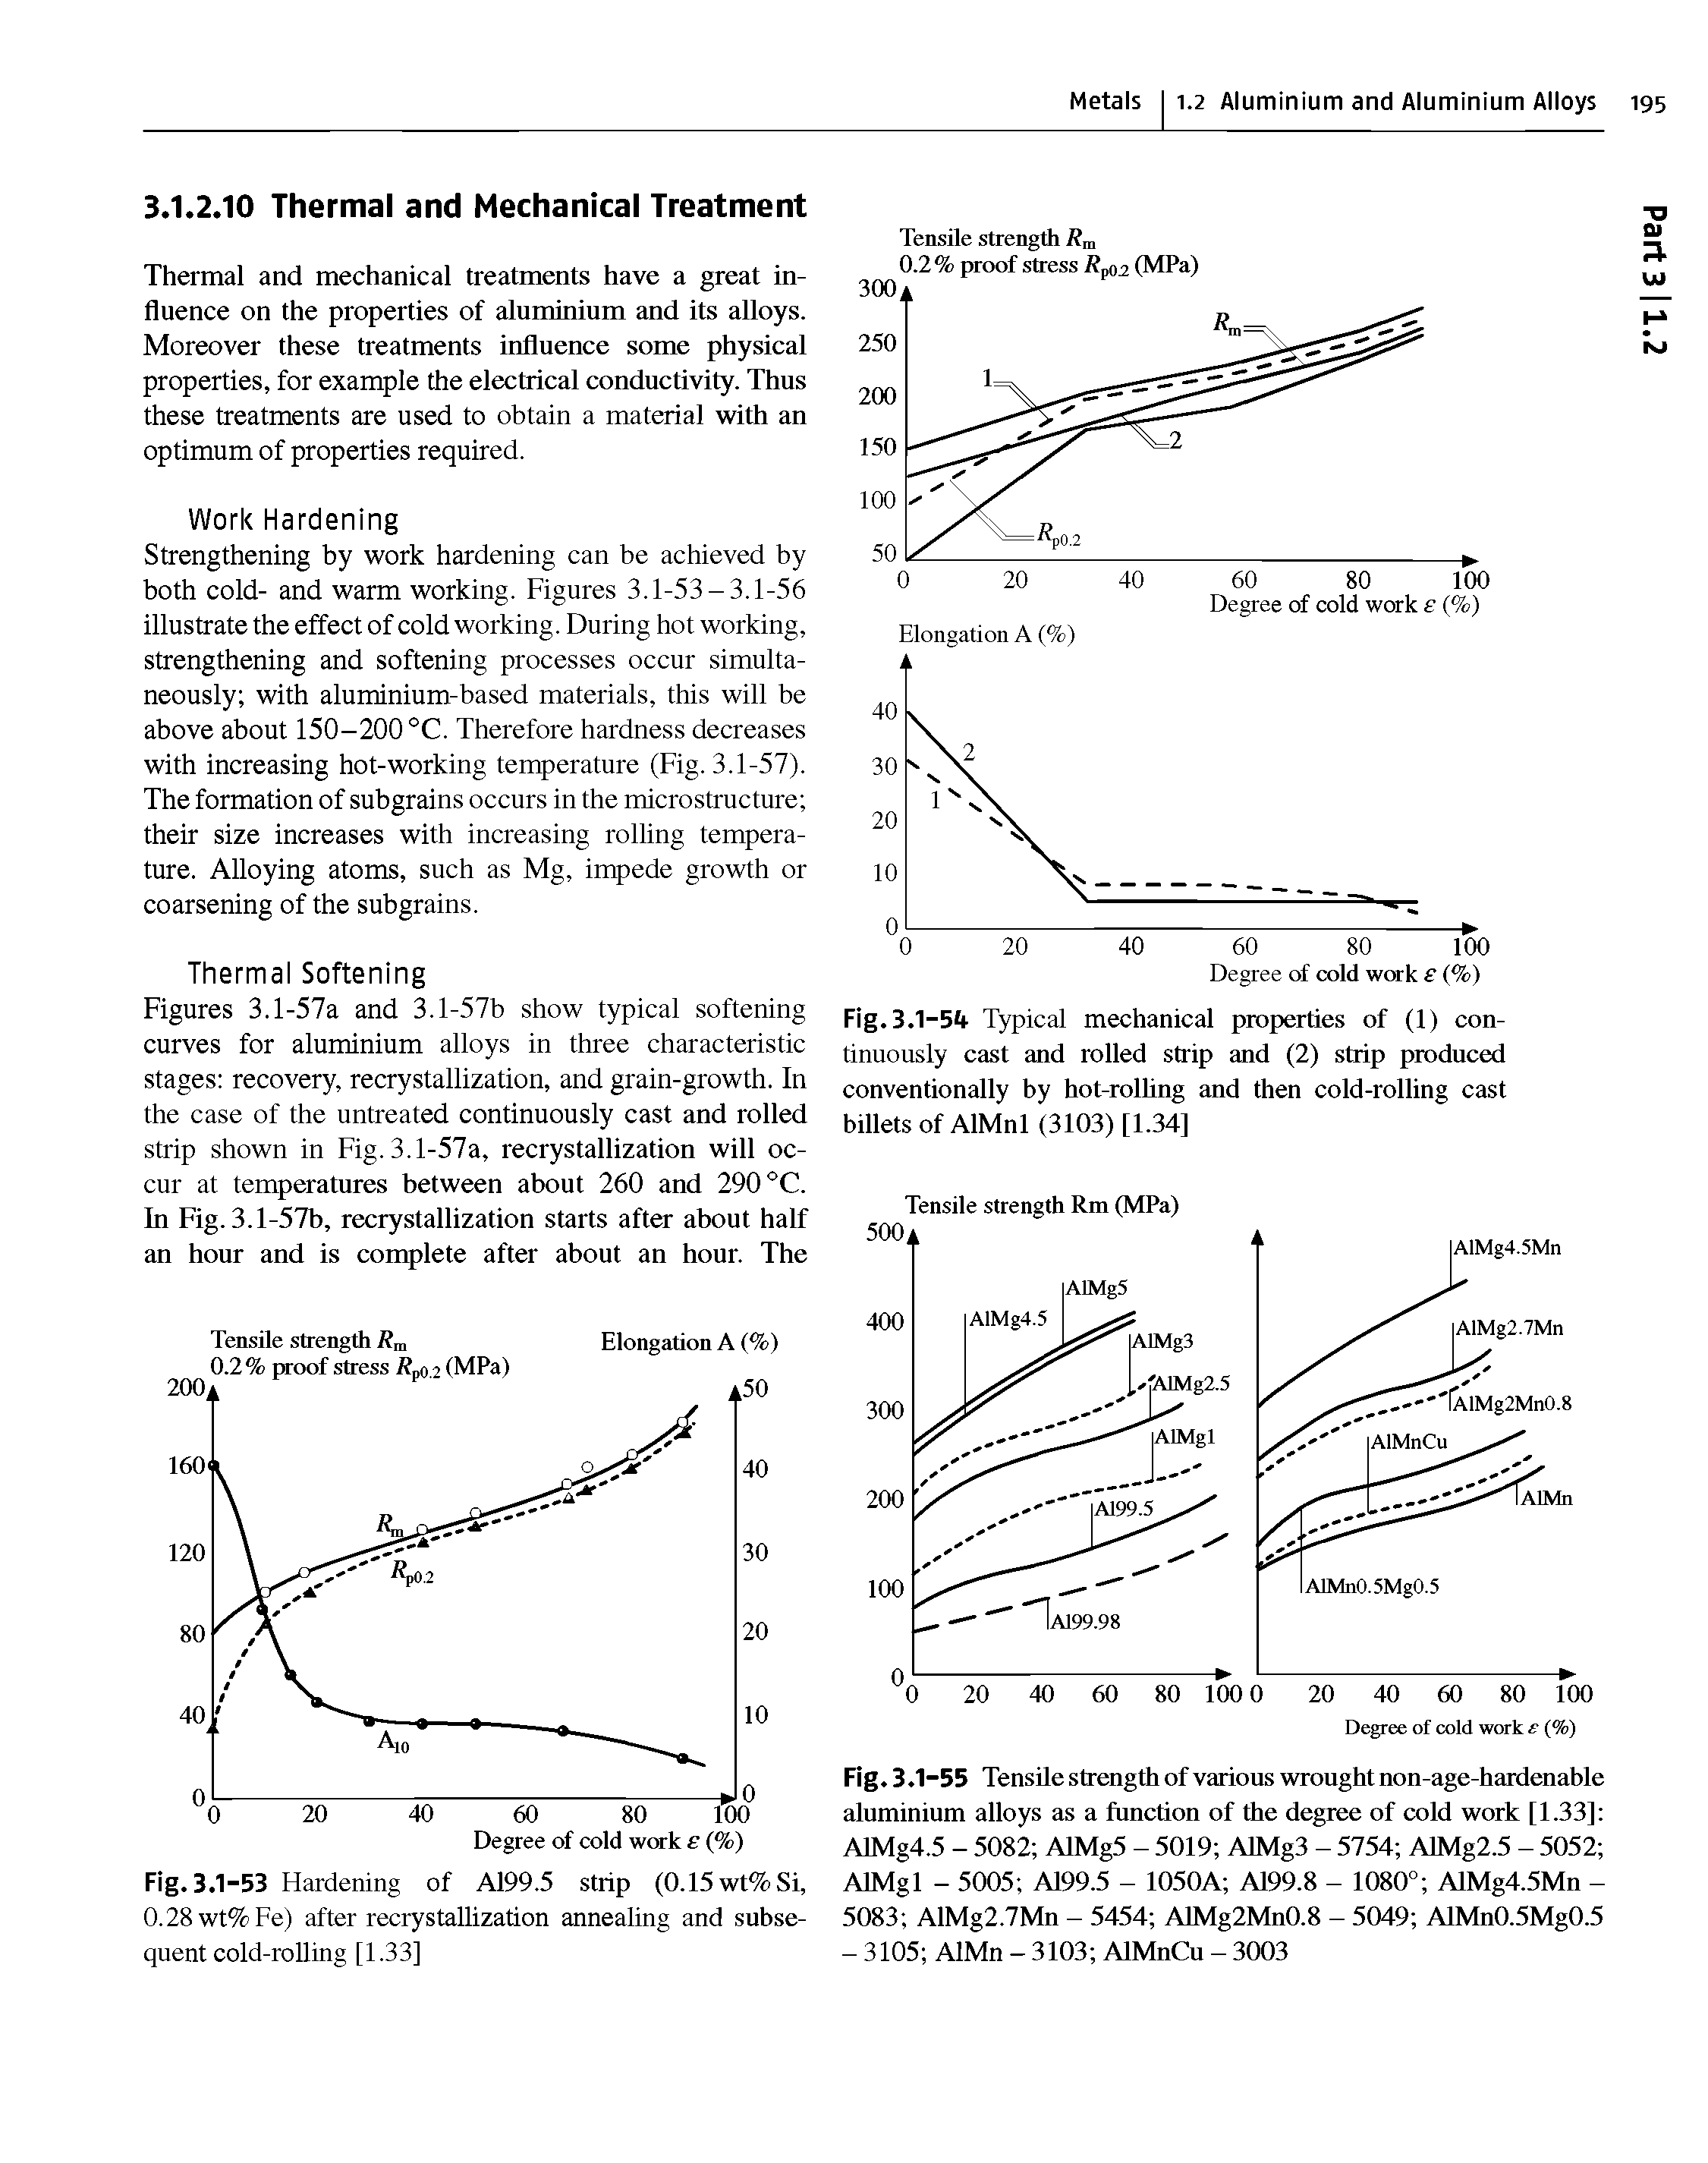 Figures 3.1-57a and 3.1-57b show typical softening curves for aluminium alloys in three characteristic stages recovery, recrystallization, and grain-growth. In the case of the untreated continuously cast and rolled strip shown in Fig. 3.1-57a, recrystallization will occur at temperatures between about 260 and 290 °C. In Fig. 3.1-57b, recrystallization starts after about half an hour and is complete after about an hour. The...